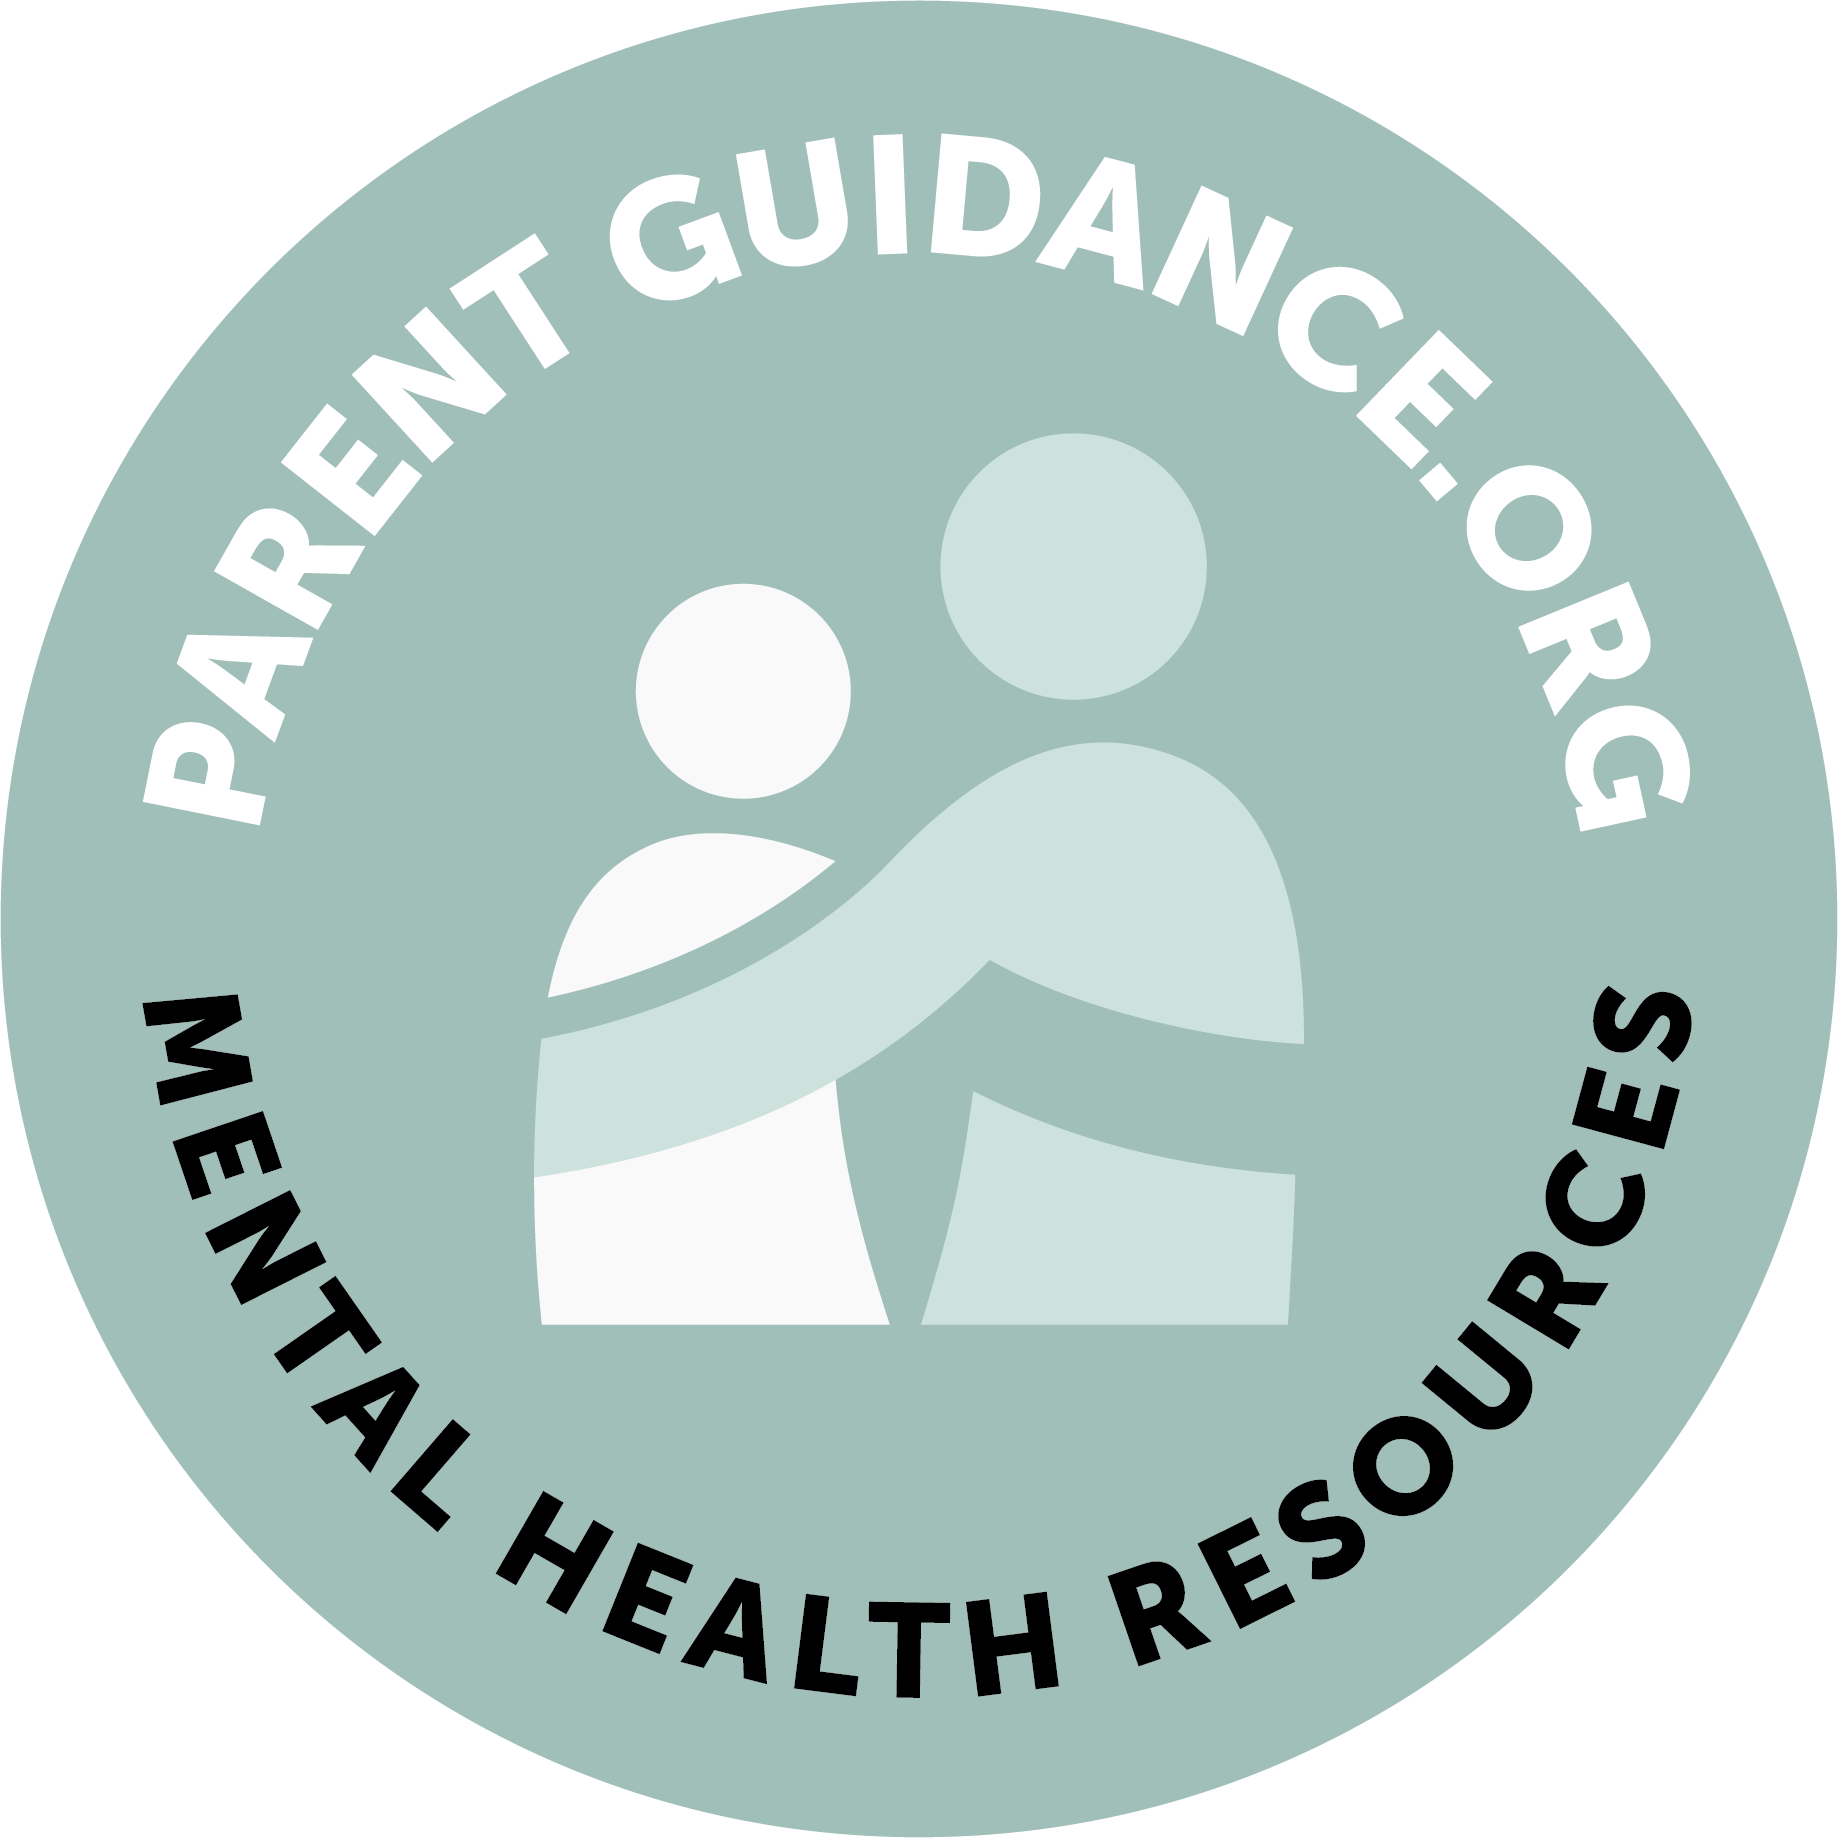 Parent Guidance.org and Mental Health Resources Icon